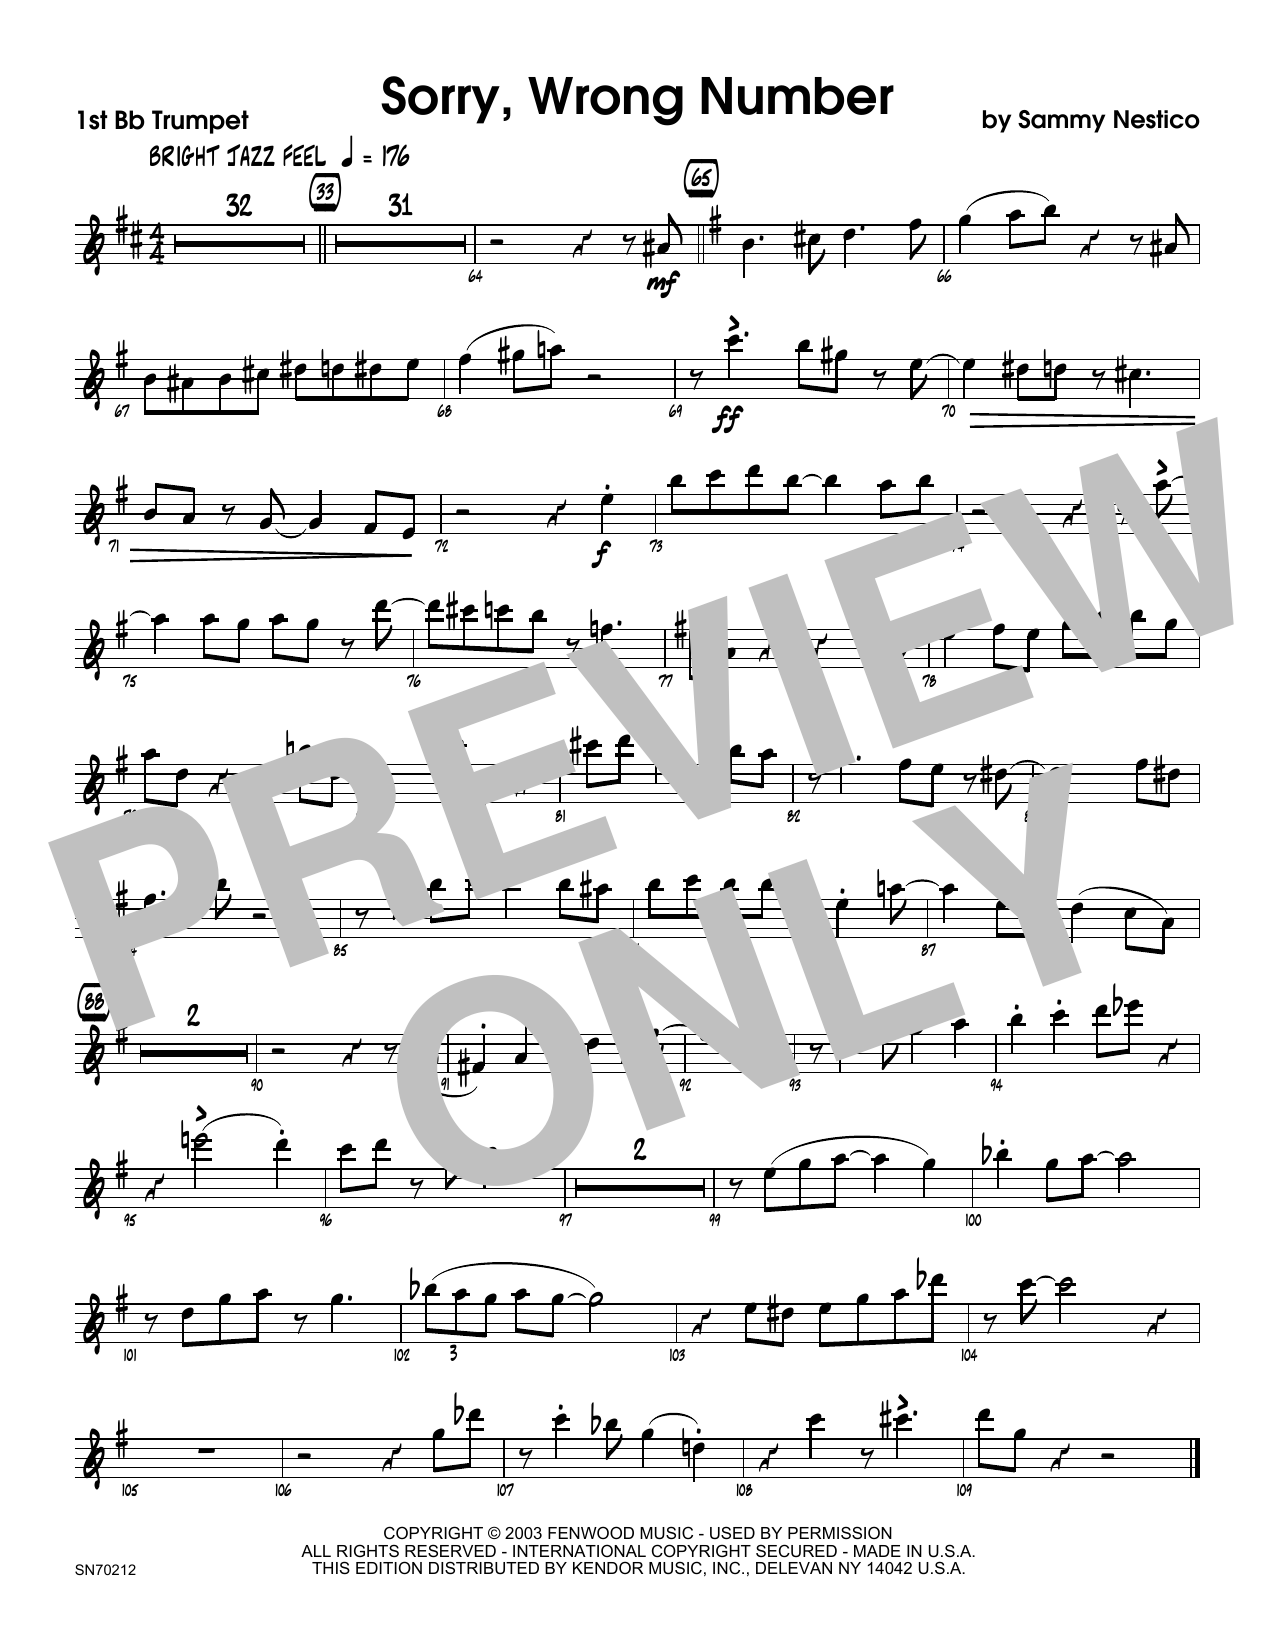 Download Sammy Nestico Sorry, Wrong Number - 1st Bb Trumpet Sheet Music